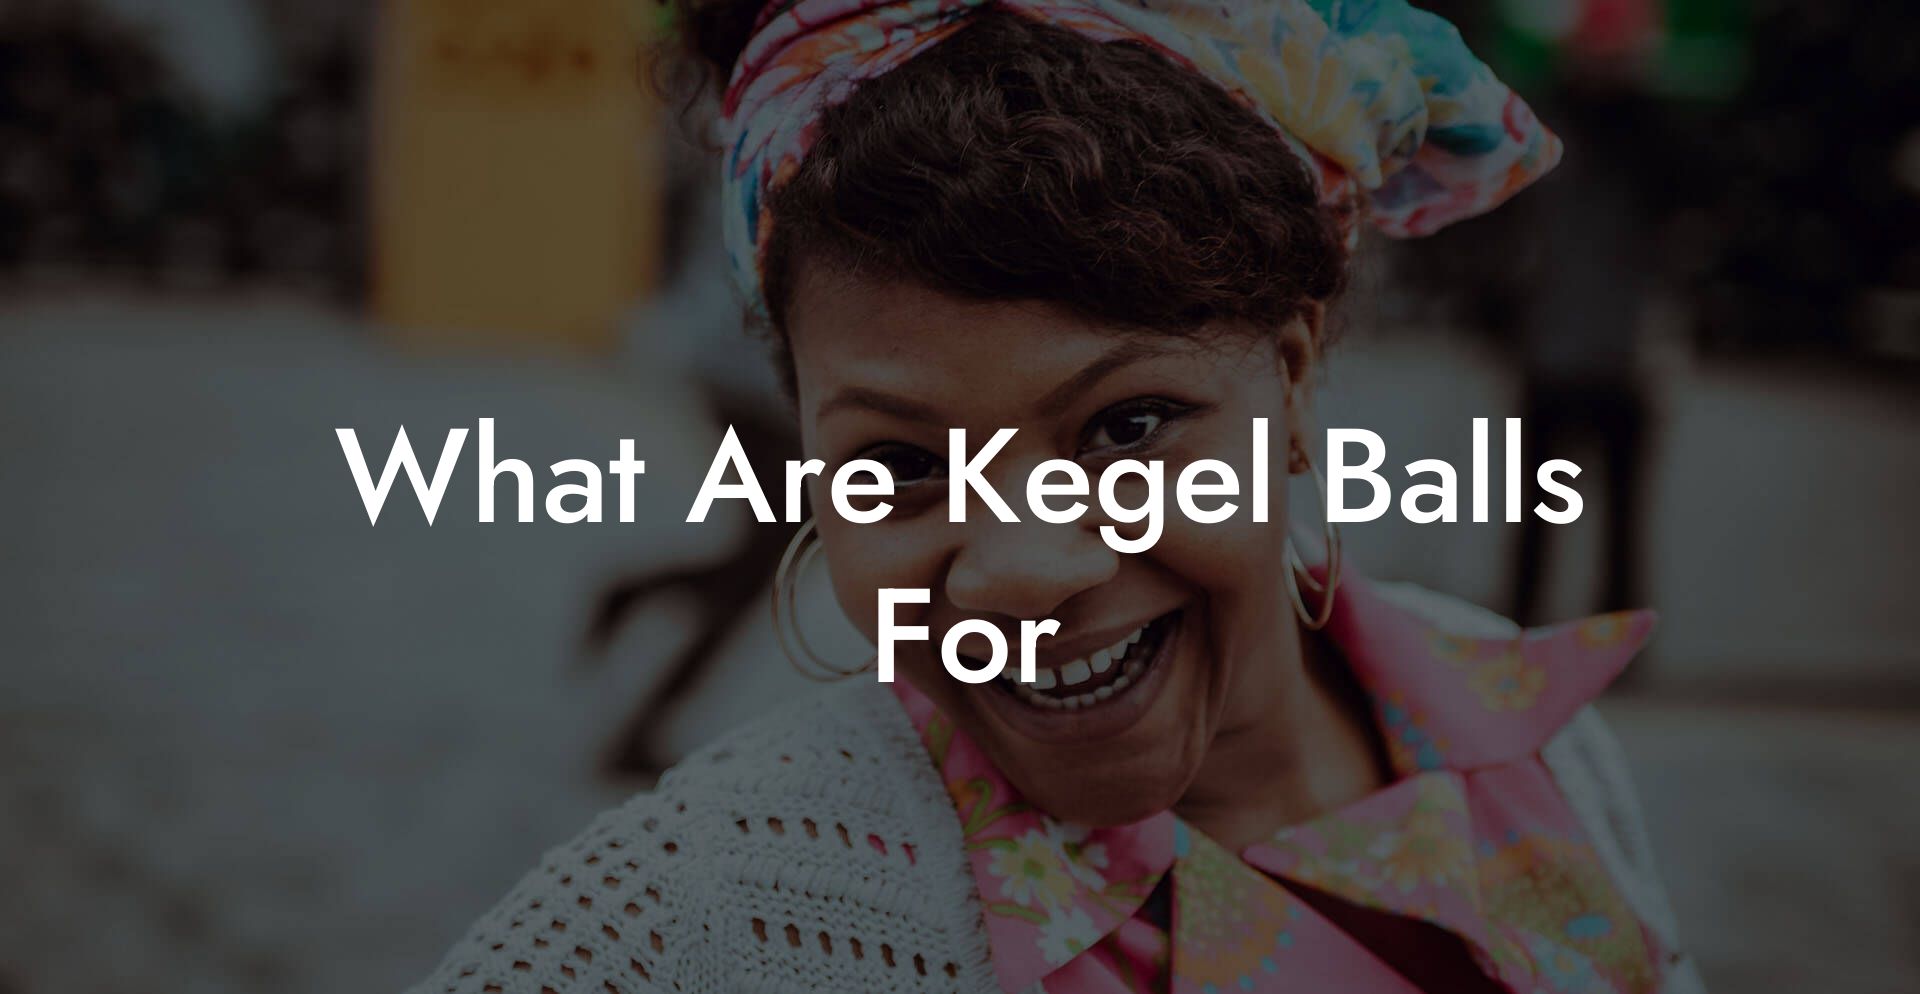 What Are Kegel Balls For